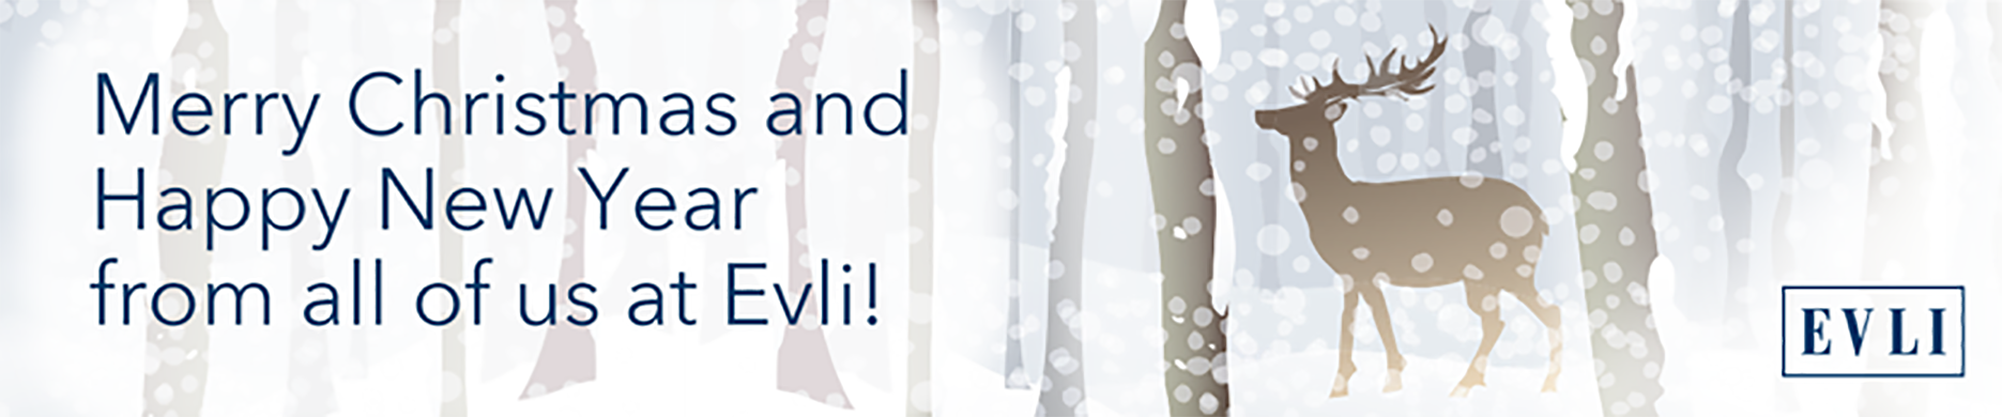 Evli Christmas Banner with a drawn deer in a snowy forest